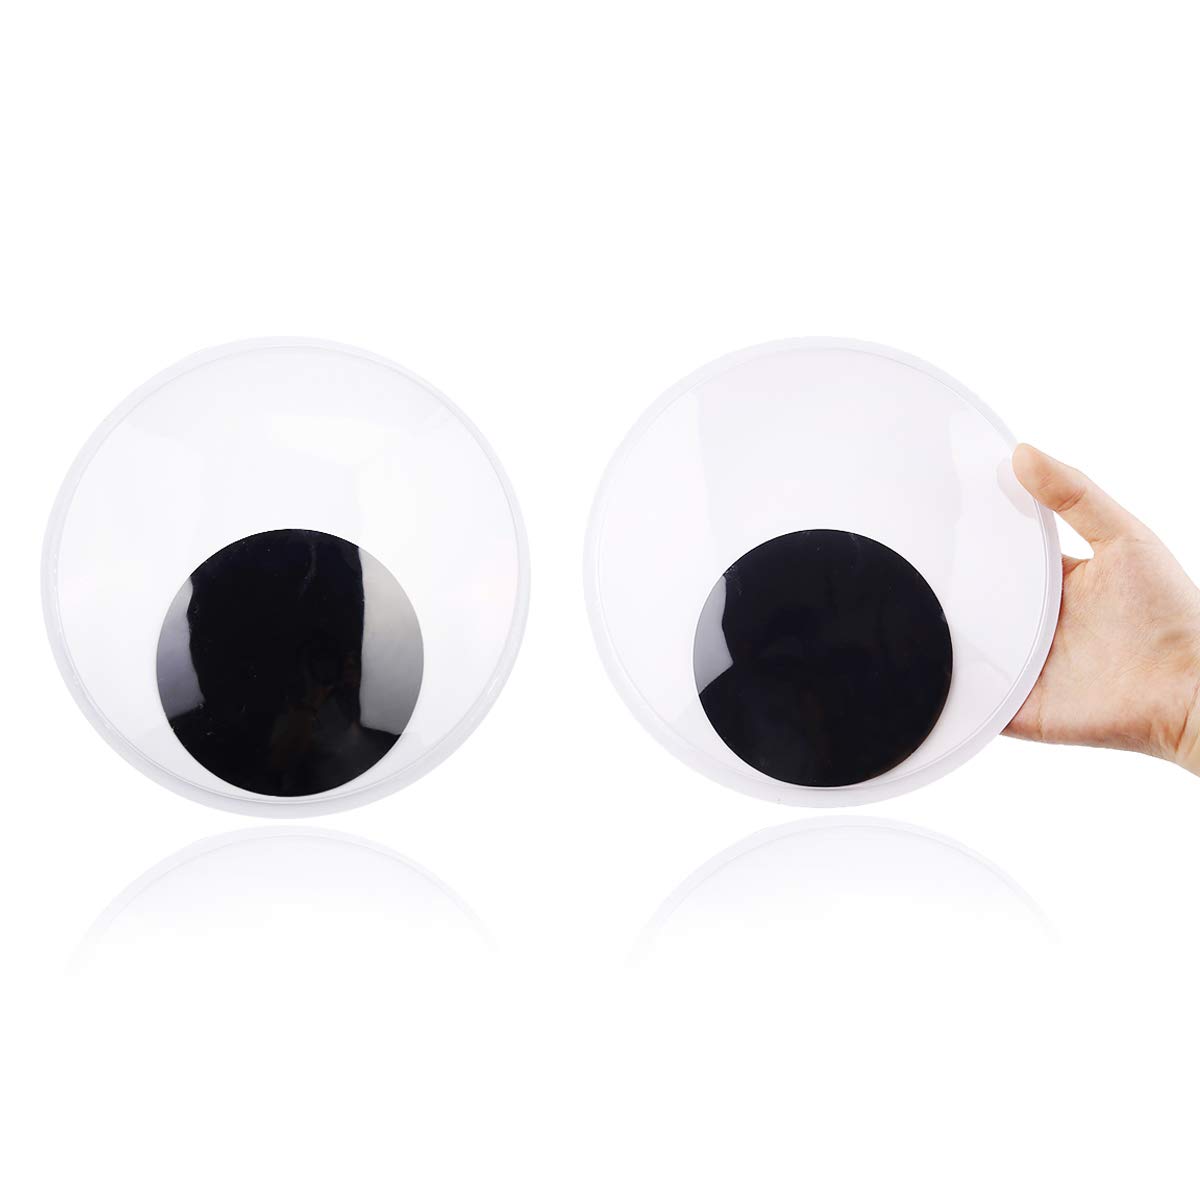 DIYASY 7.5 Inches Giant Googly Eyes, 2 Pcs Large Wiggle Eyes Self Adhesive  for DIY Craft Decorations and Christmas Ornaments. 7.5 Inch 2 pcs